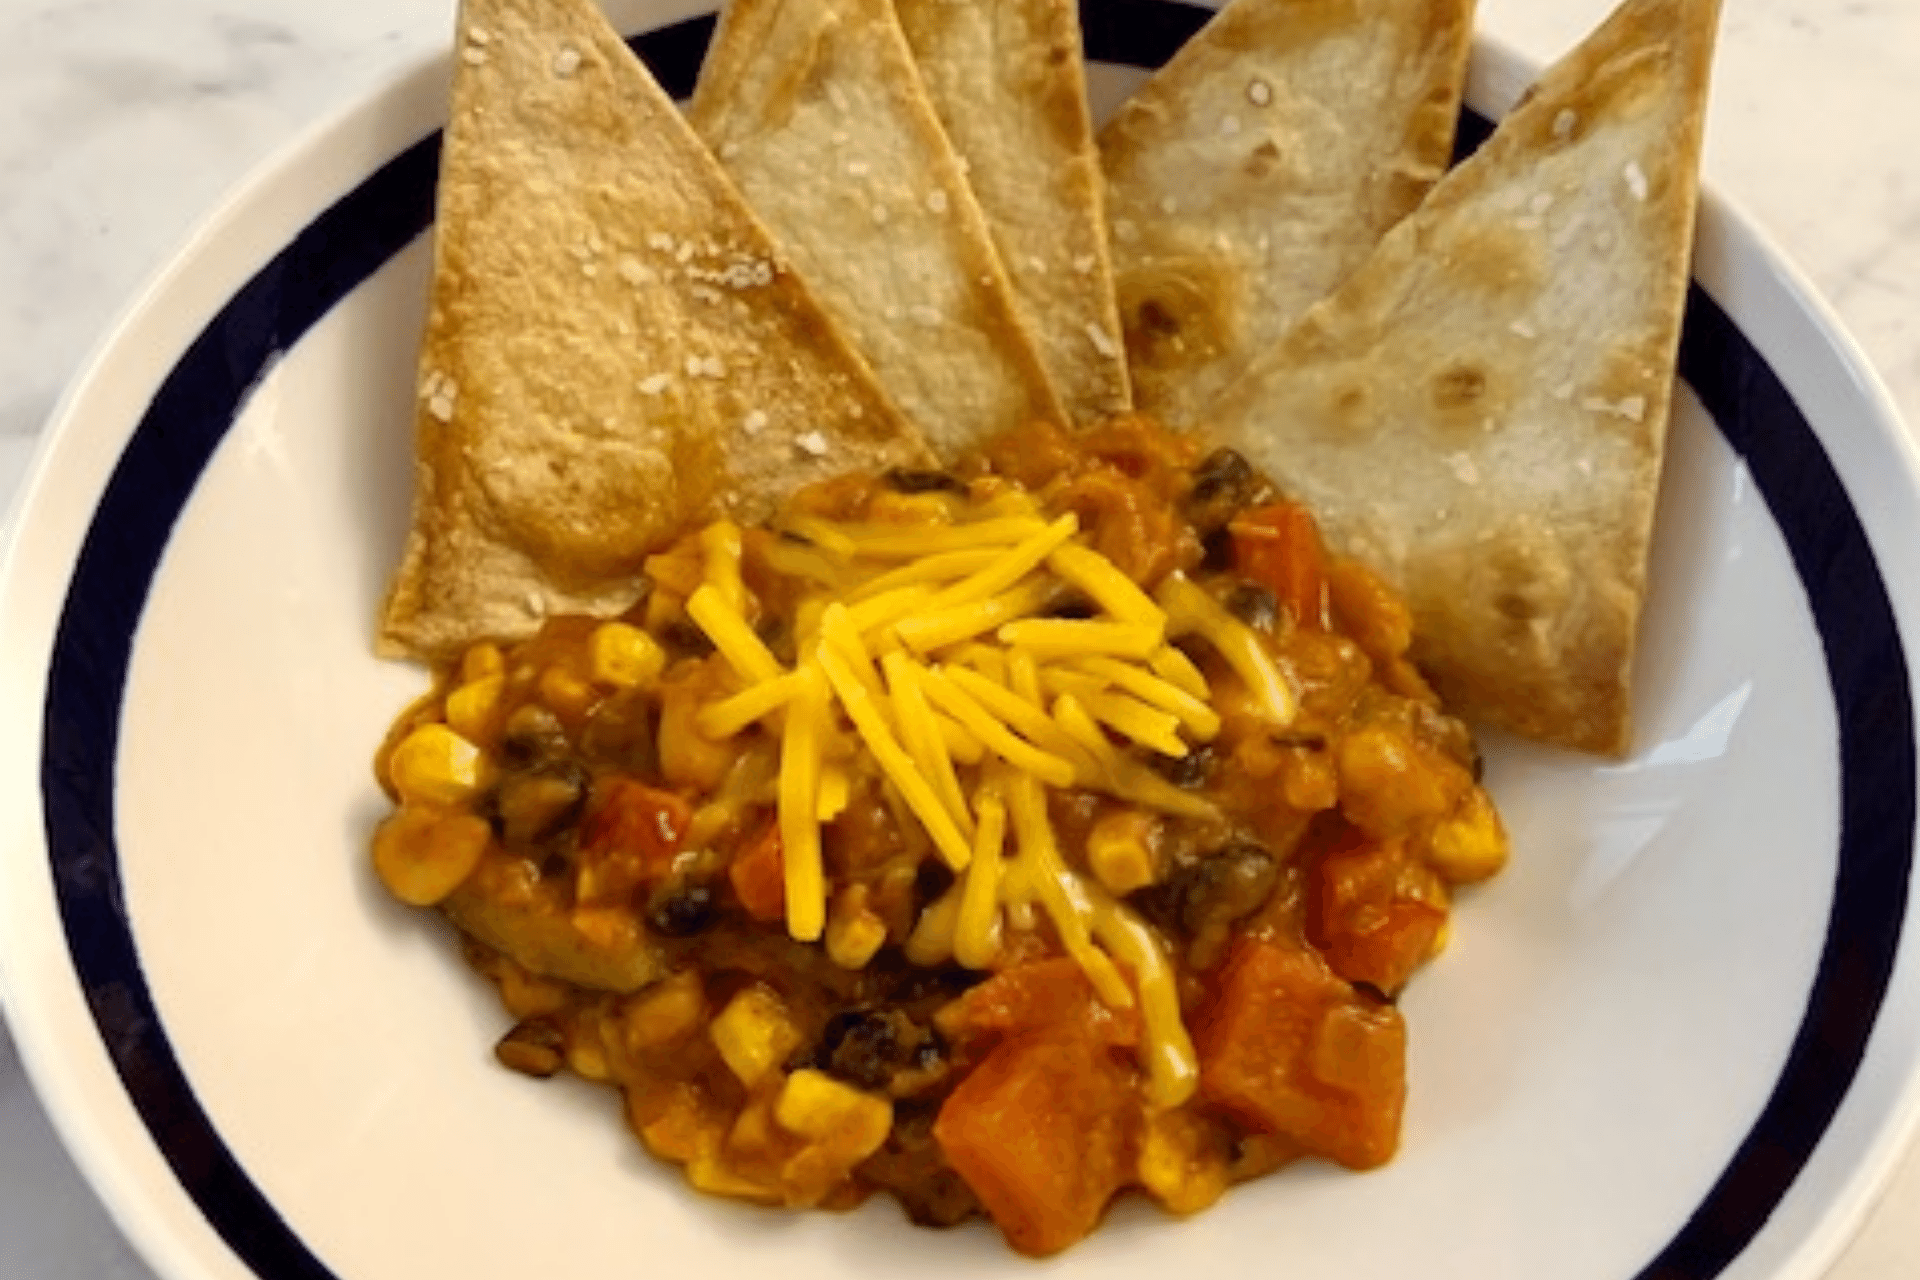 Vegetarian Chili with Homemade Tortilla Chips